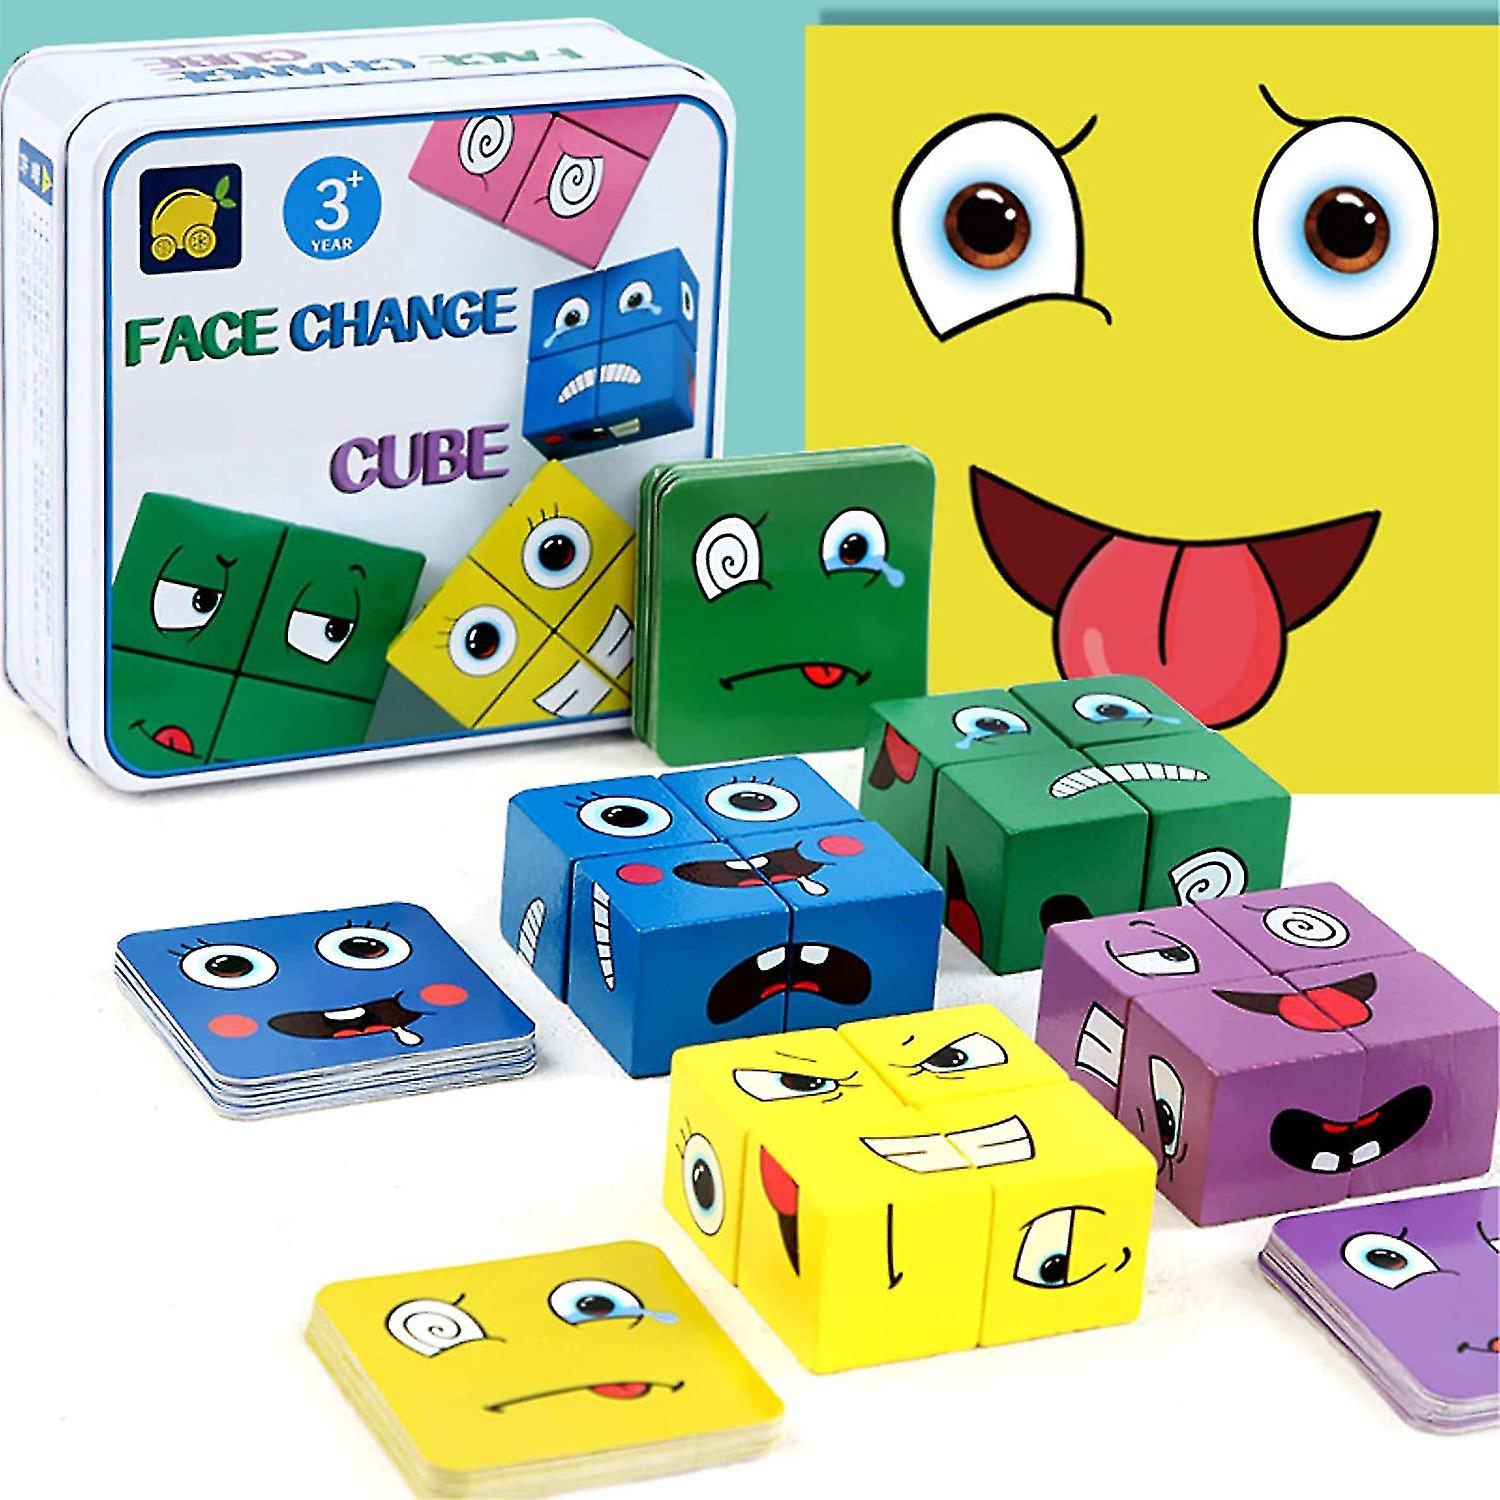 Born Pretty Veeki Face Change Cube Game Wooden Expressions Matching Block Puzzles Building Games Toys For Kids